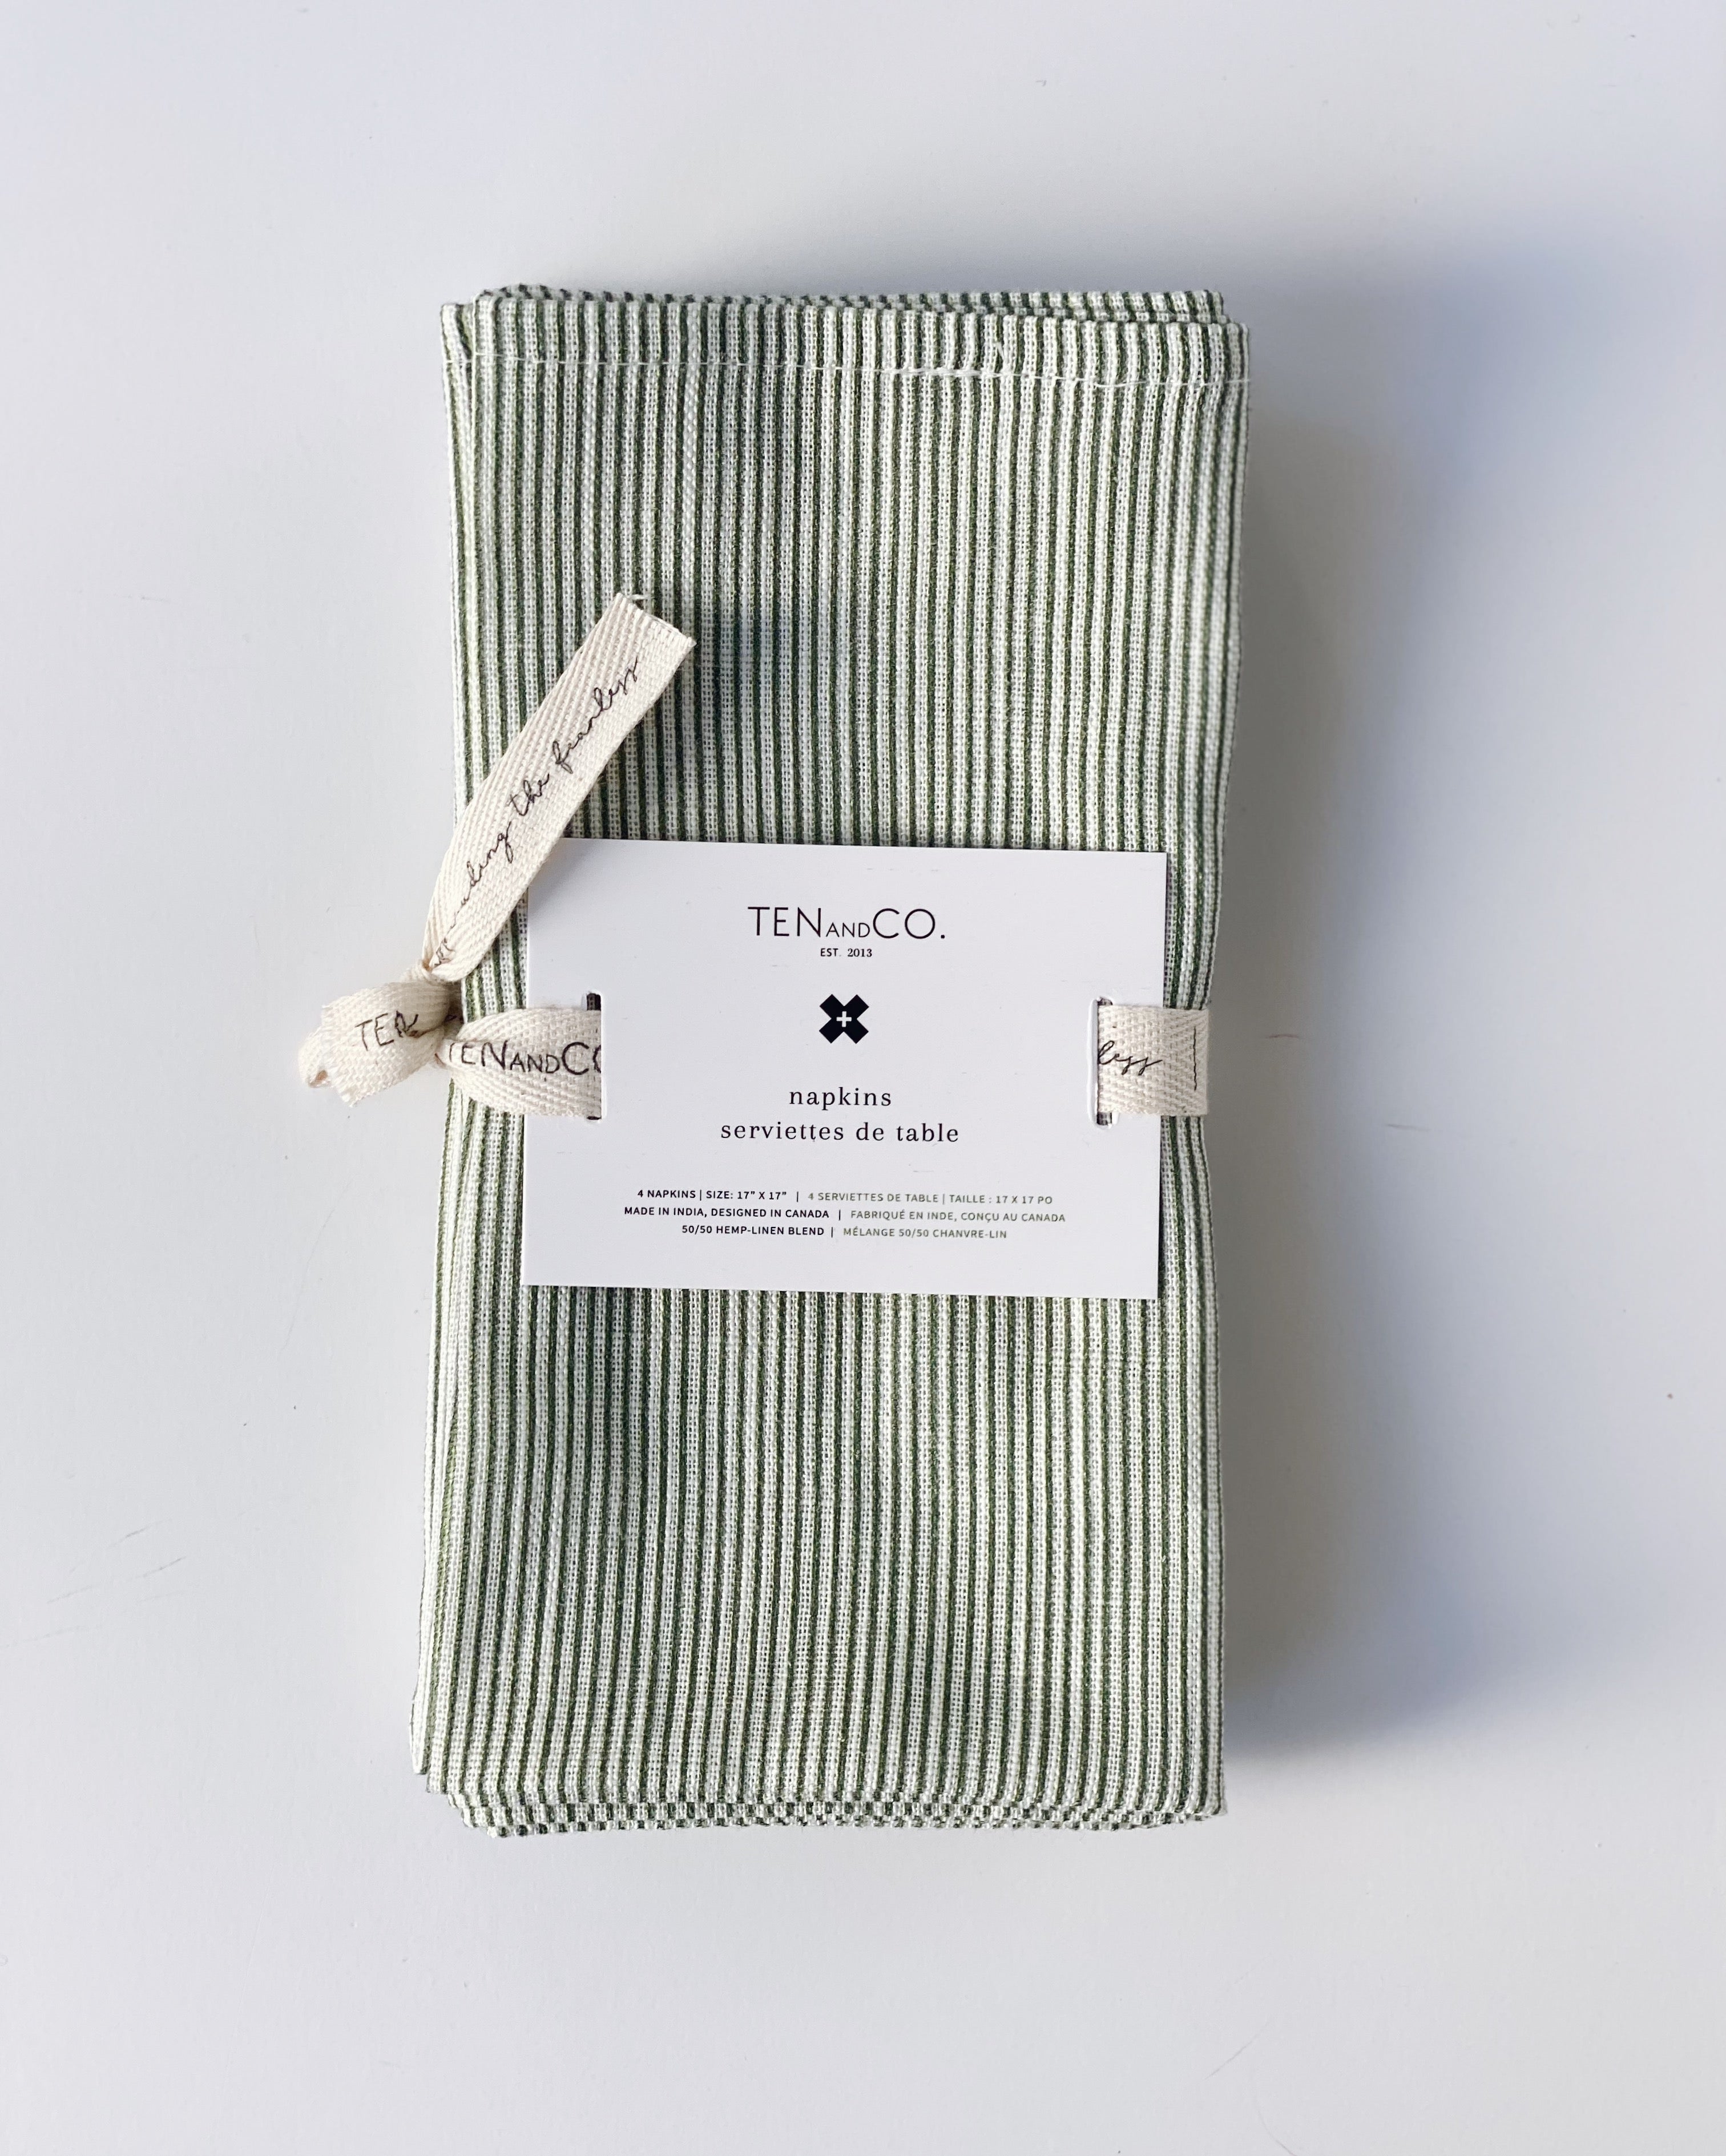 Flat lay image of Stripes Sage, 4 set of Napkins on a white background. The napkins have a white base colour with stripes of green covering the entirety of the cloth and are tied together with Ten and Co twill tape and a recyclable paper tag laying on top.